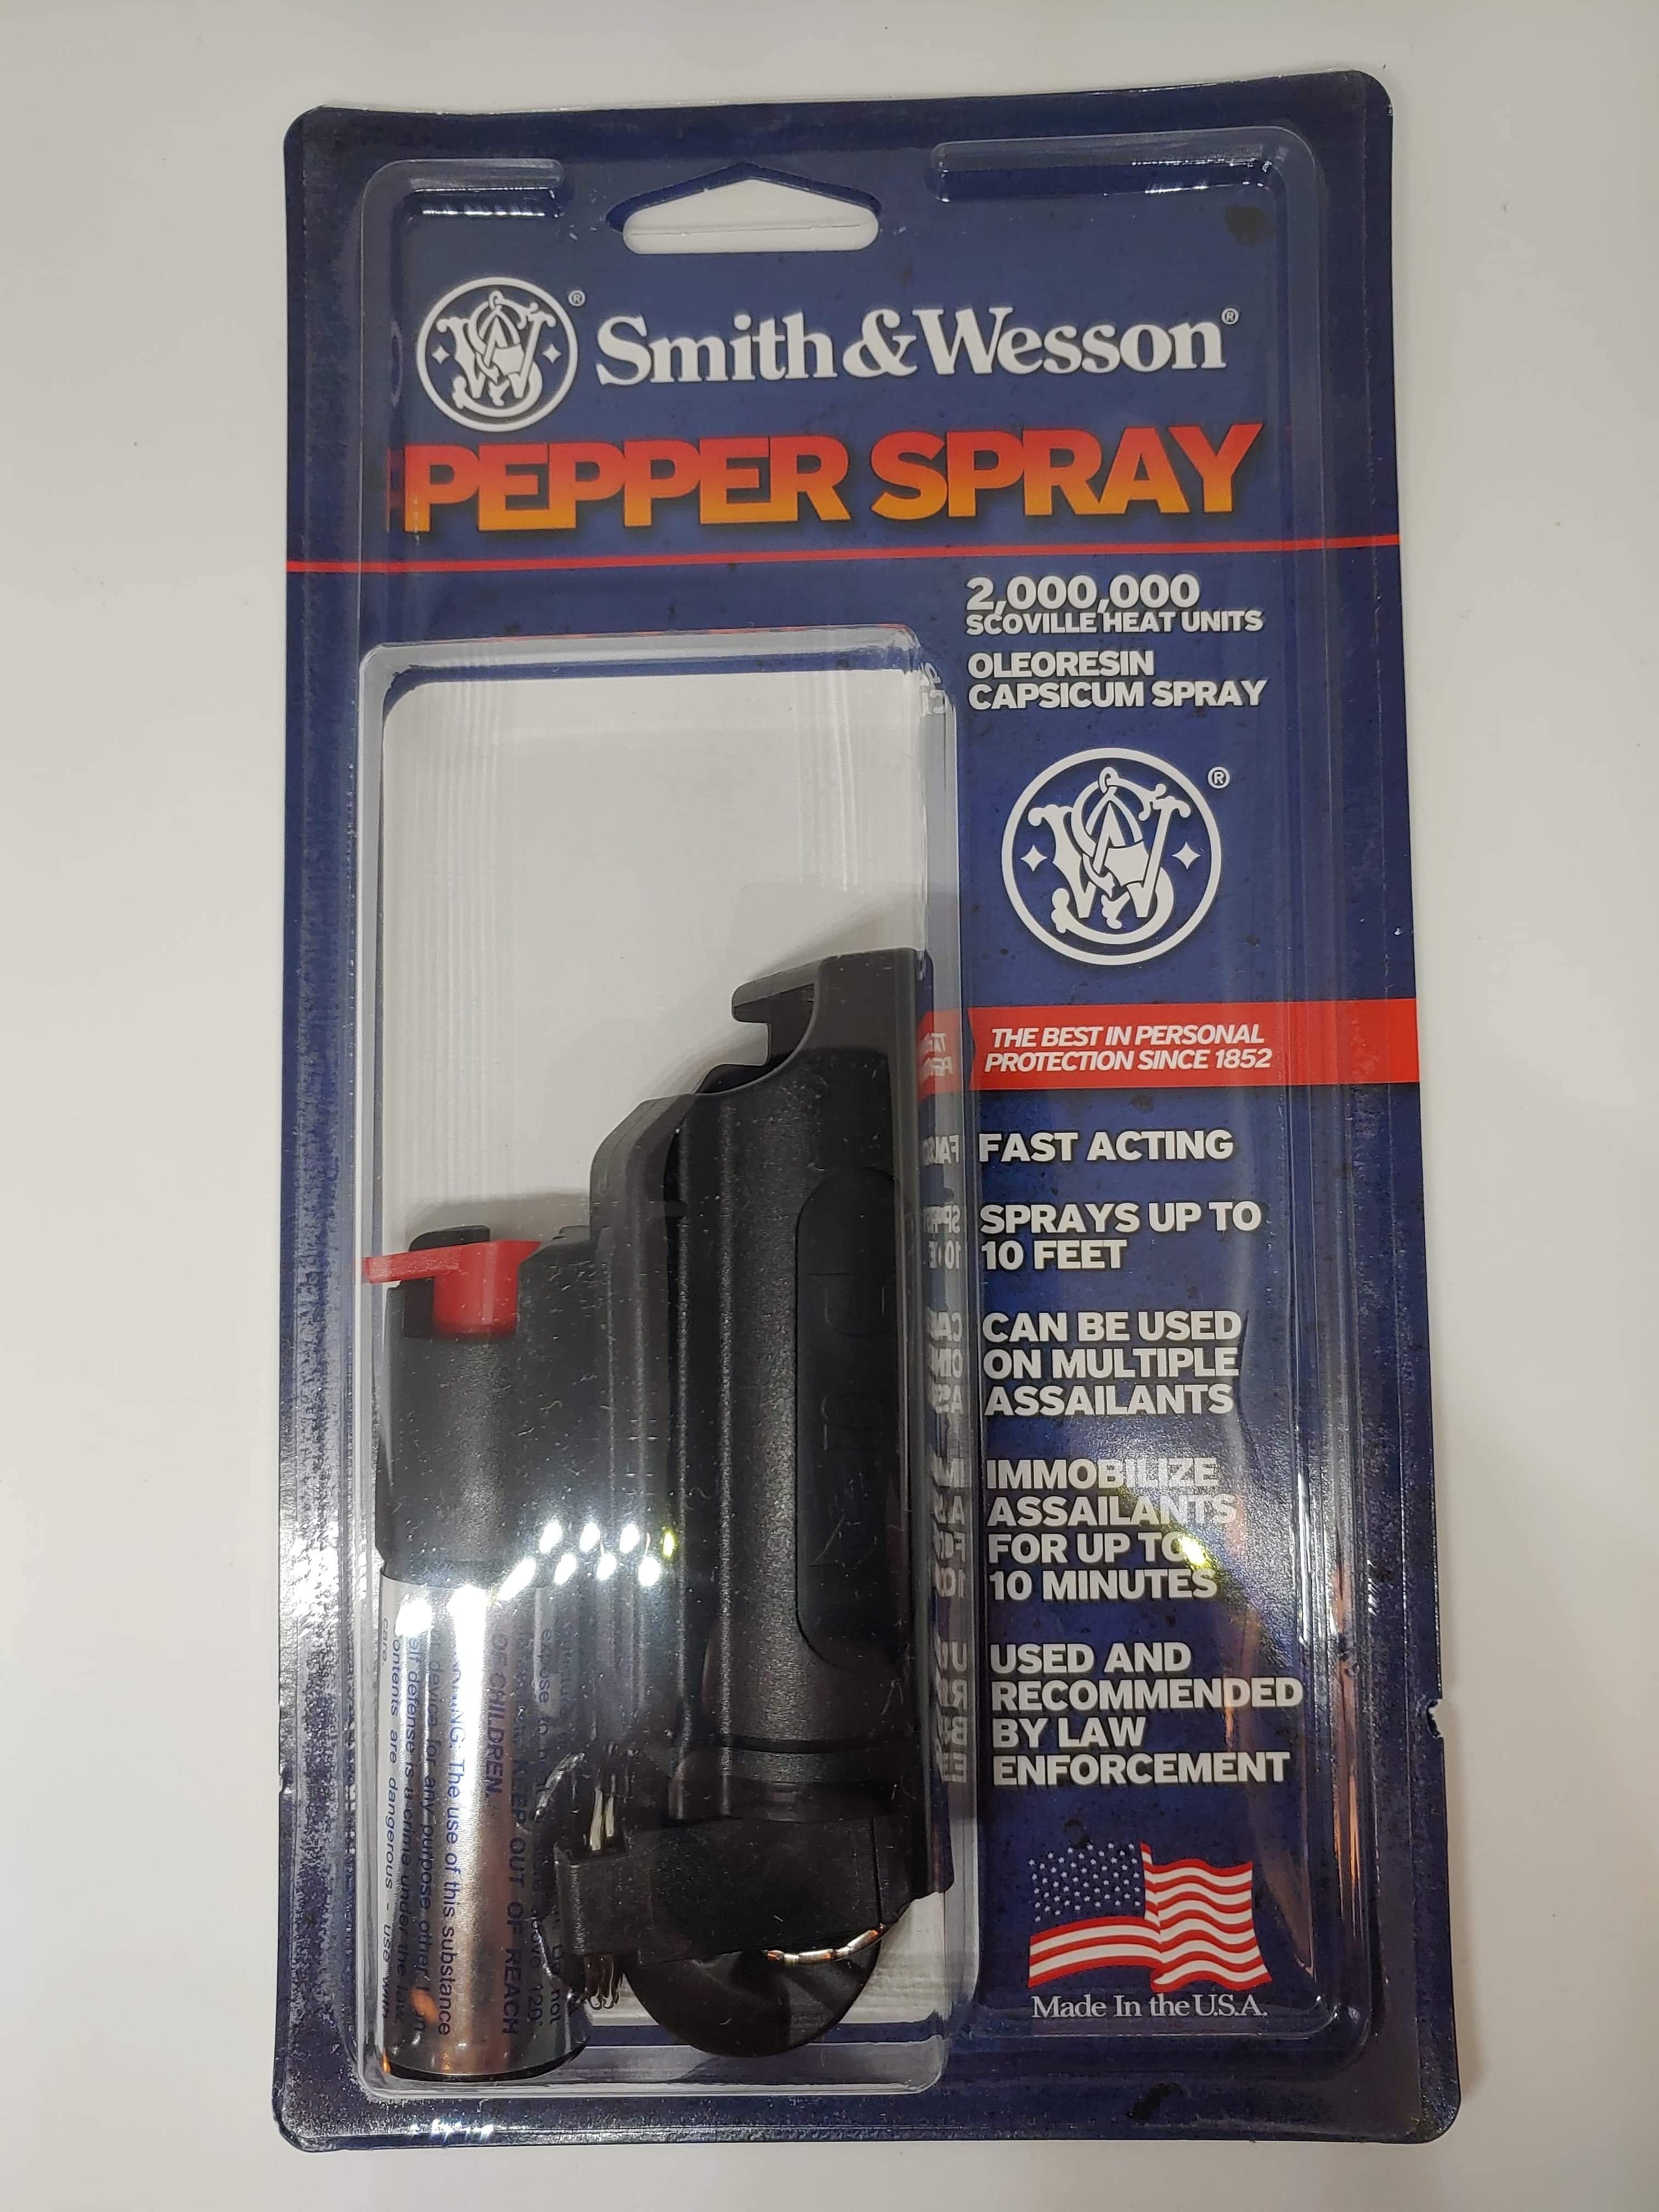 Smith & Wesson Pepper Spray Mace & Pepper Spray Shield Protection Products LLC.